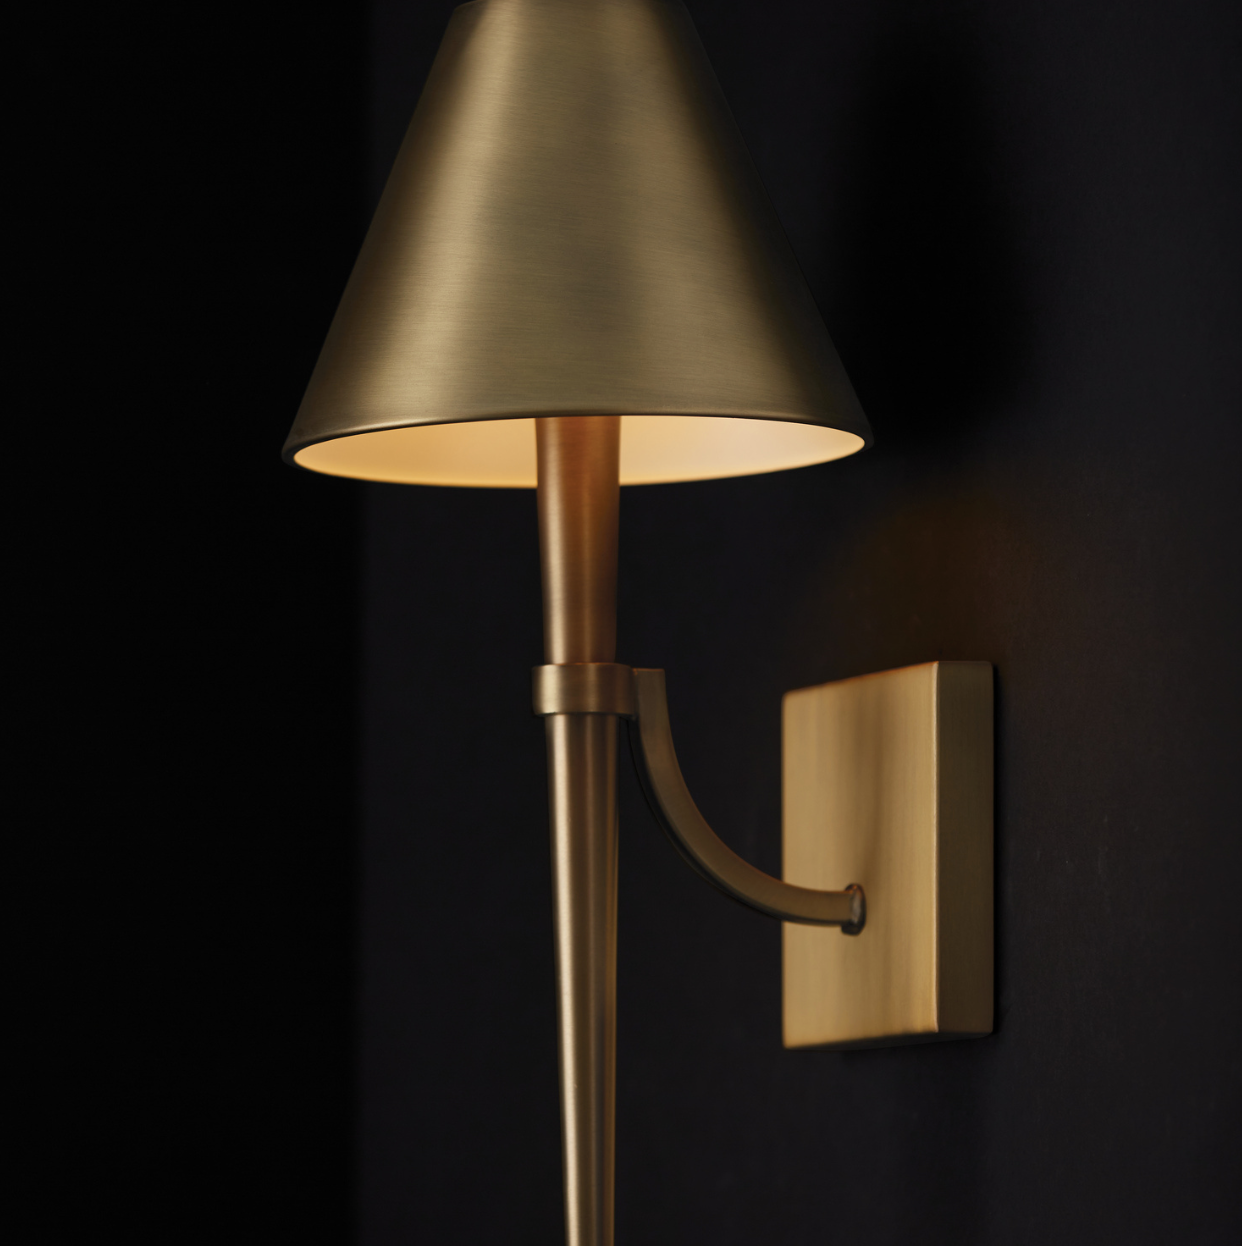 Polished Nickel Wall Lamp Elegant Lighting Fixture for Your Walls